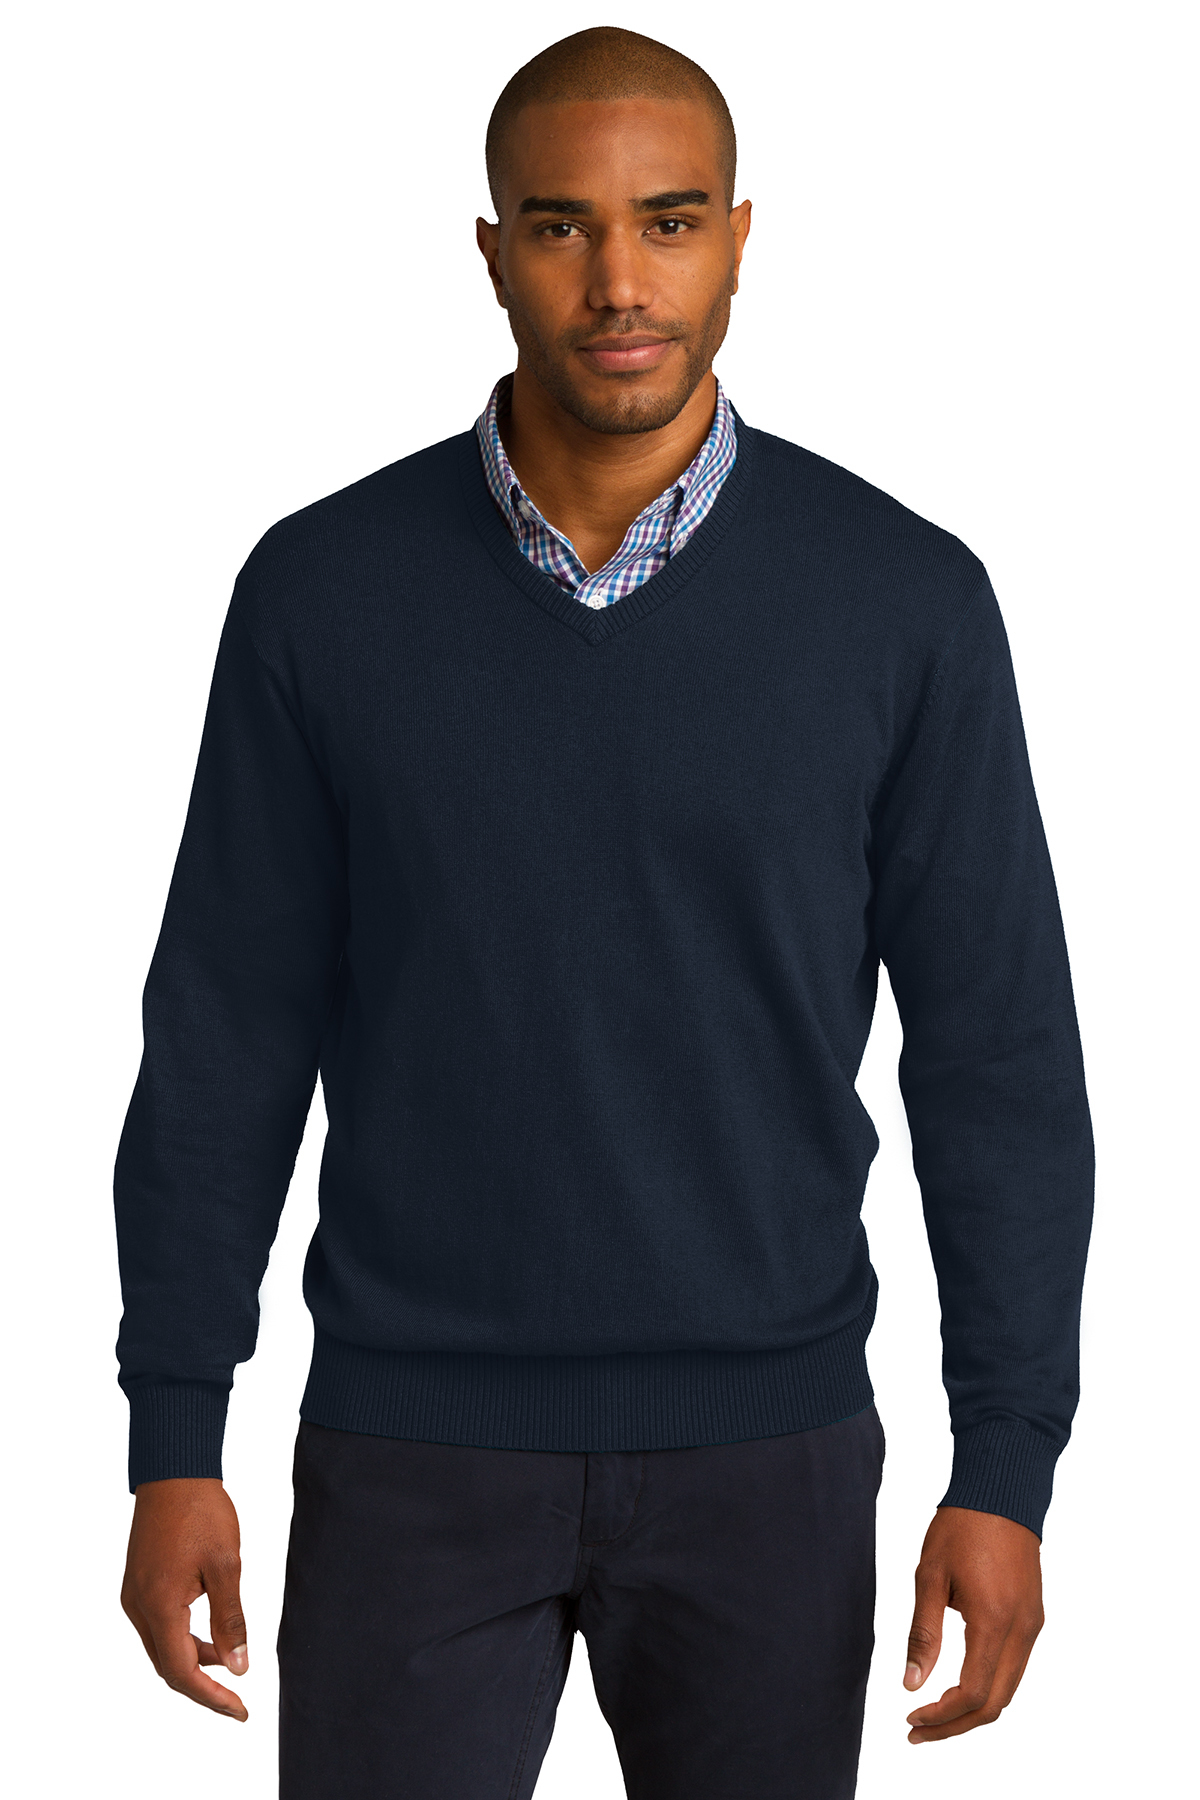 V-neck sweaters is fashionable and versatile, and can show off the wearer's neck line, slimming and modifying the face.